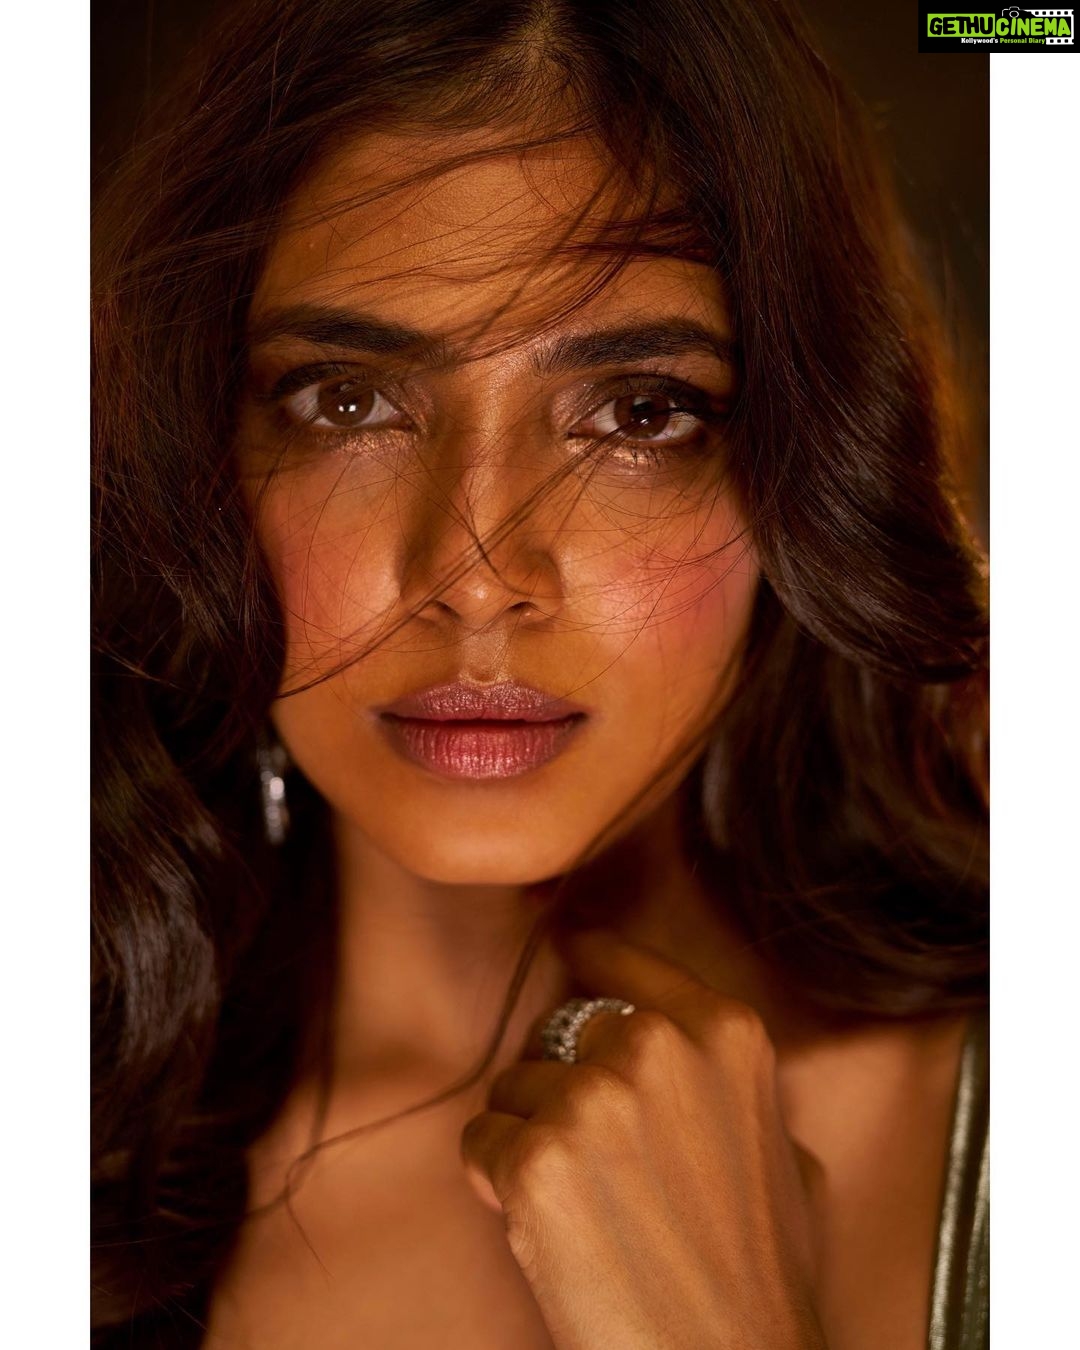 Malavika Mohanan Instagram - It's cool. It's smart. It's elegant, Just like me! Presenting the uber-cool, magical and colourful: TECNO CAMON 19 Pro Mondrian - India's First Multi-colour Changing Smartphone, which can change its colour in the sunlight. Watch out the video for more! @TecnoMobileIndia Hurry and Pre-book your favourite smartphone at a special launch price of Rs.17,999/- on https://amzn.to/3f3rMvV #TECNO #TECNOMobile #TECNOCAMON19ProMondrian #MondrianEdition #AmazingNightPortraits #PaidPartnership